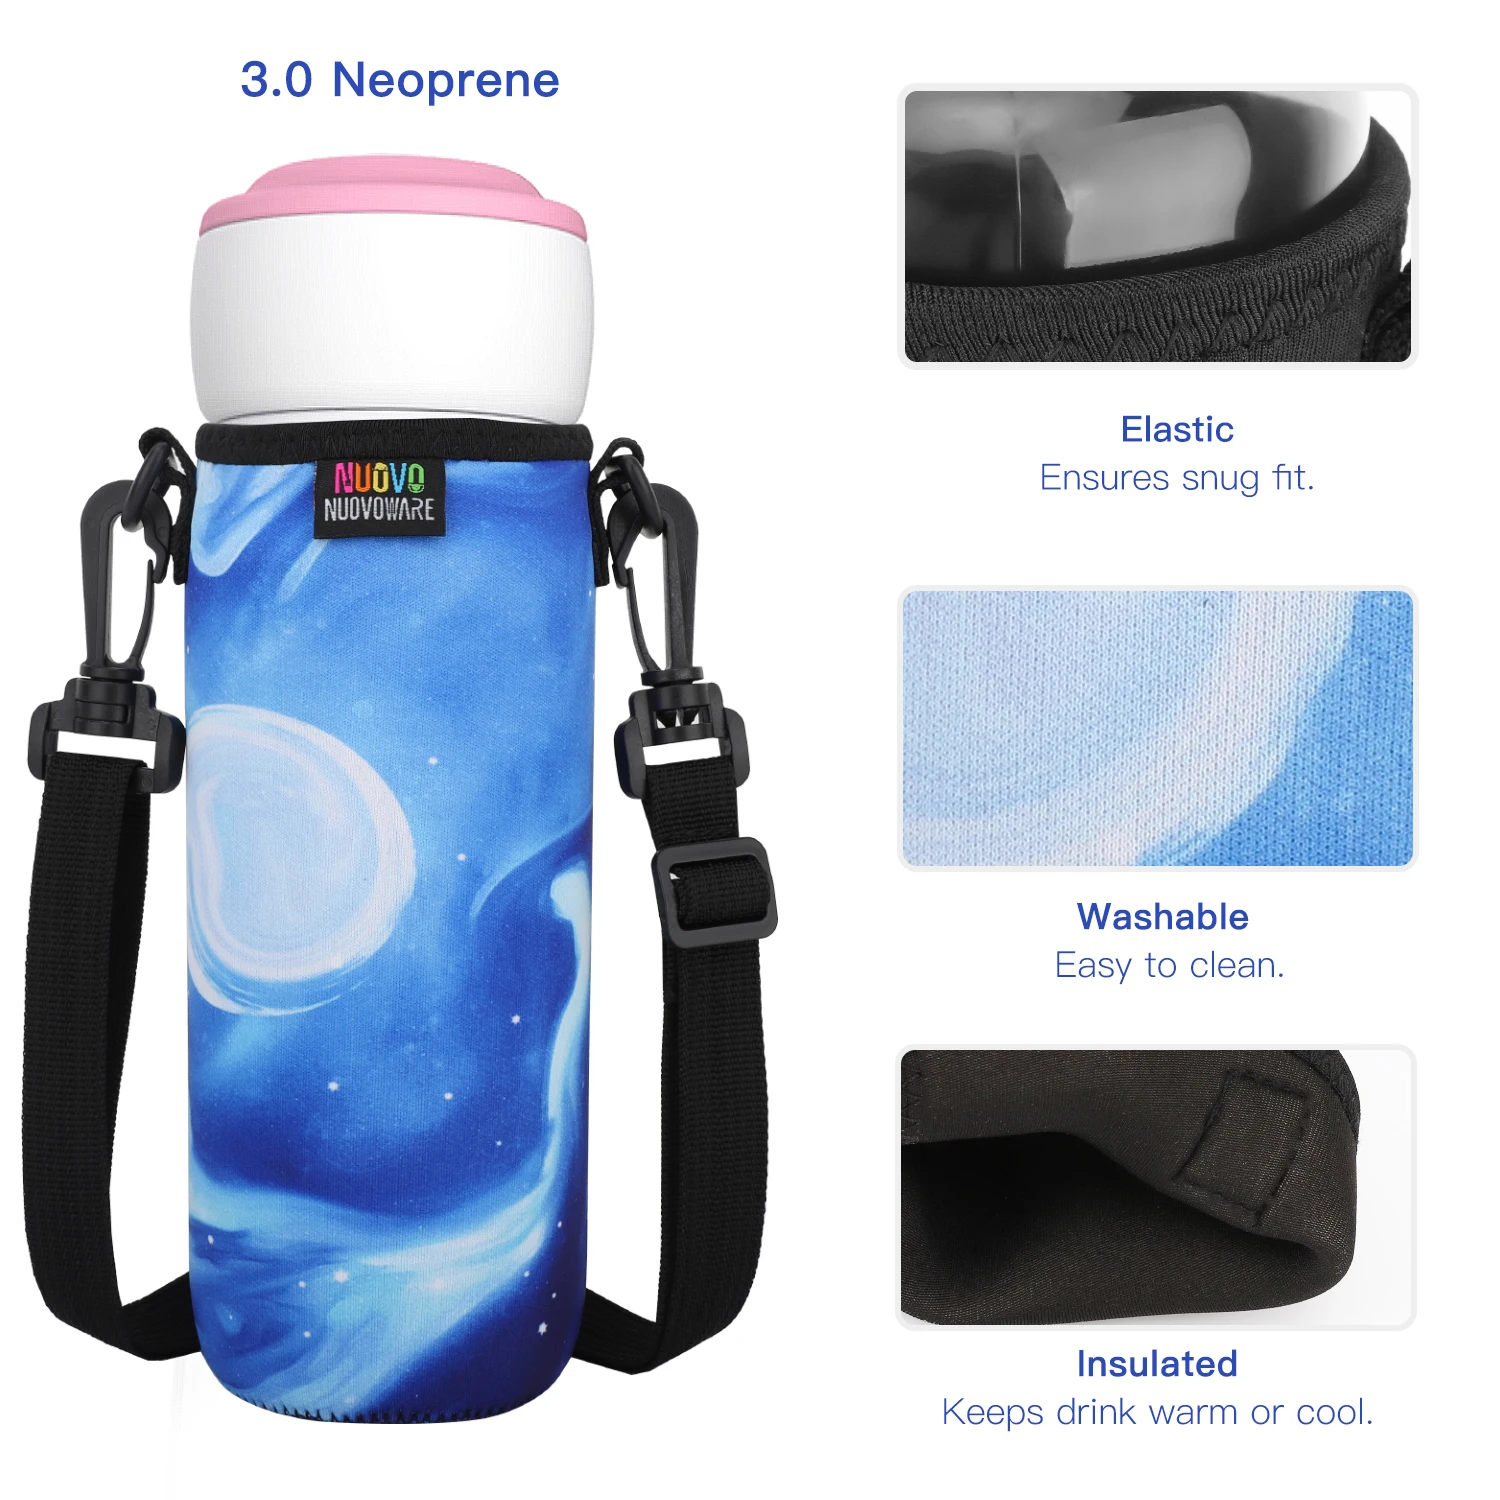 Wanty Neoprene 17 oz Insulated Water Drink Bottle Cooler Carrier Cover Sleeve Tote Bag Pouch Holder Strap for Climbing Cycling and Running Outdoor